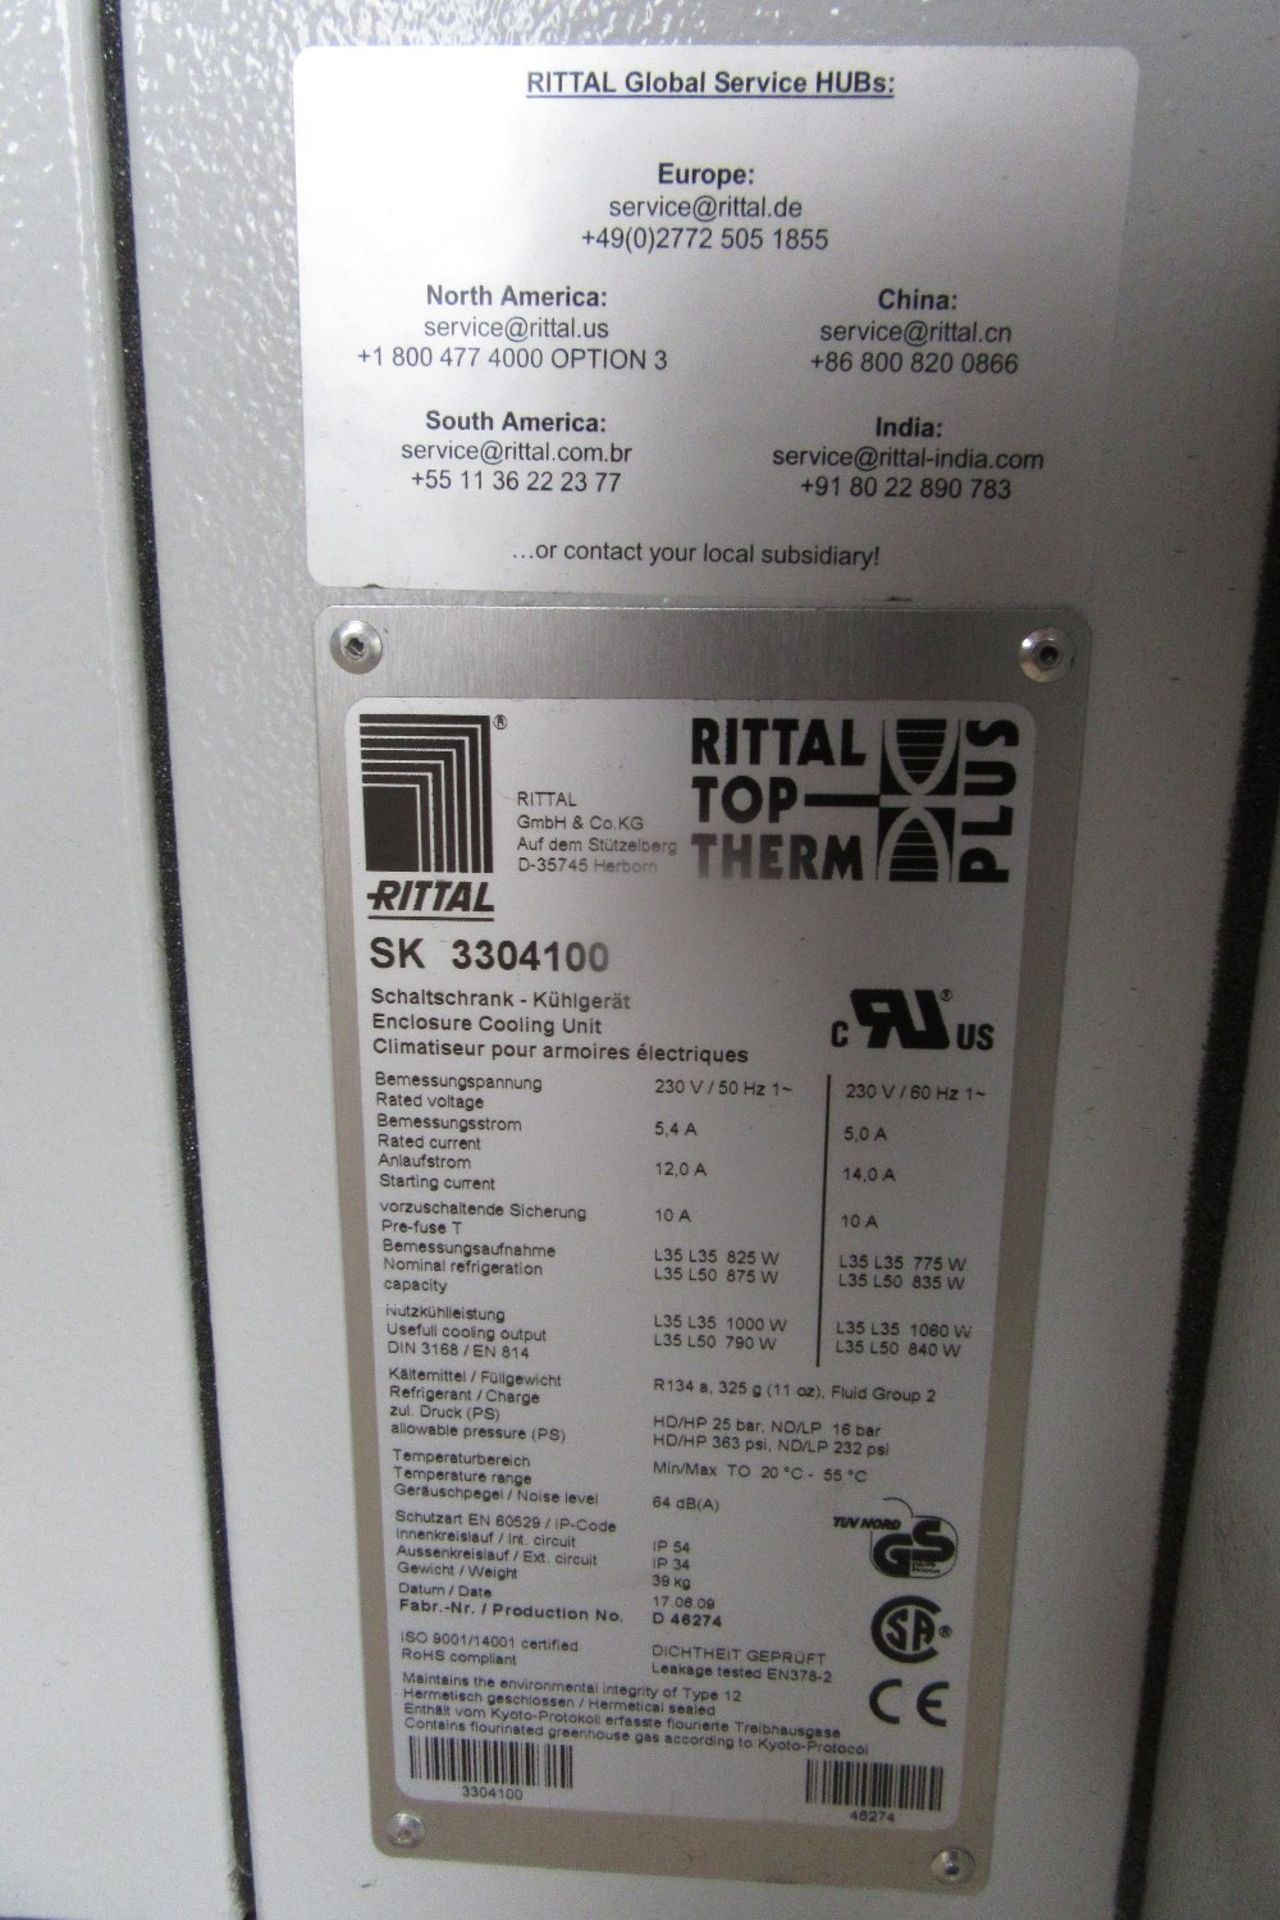 Woodward Power Solutions Local Control Cabinet inc: Rittal Top Therm Plus SK3304100 Enclosure Coolin - Image 6 of 7